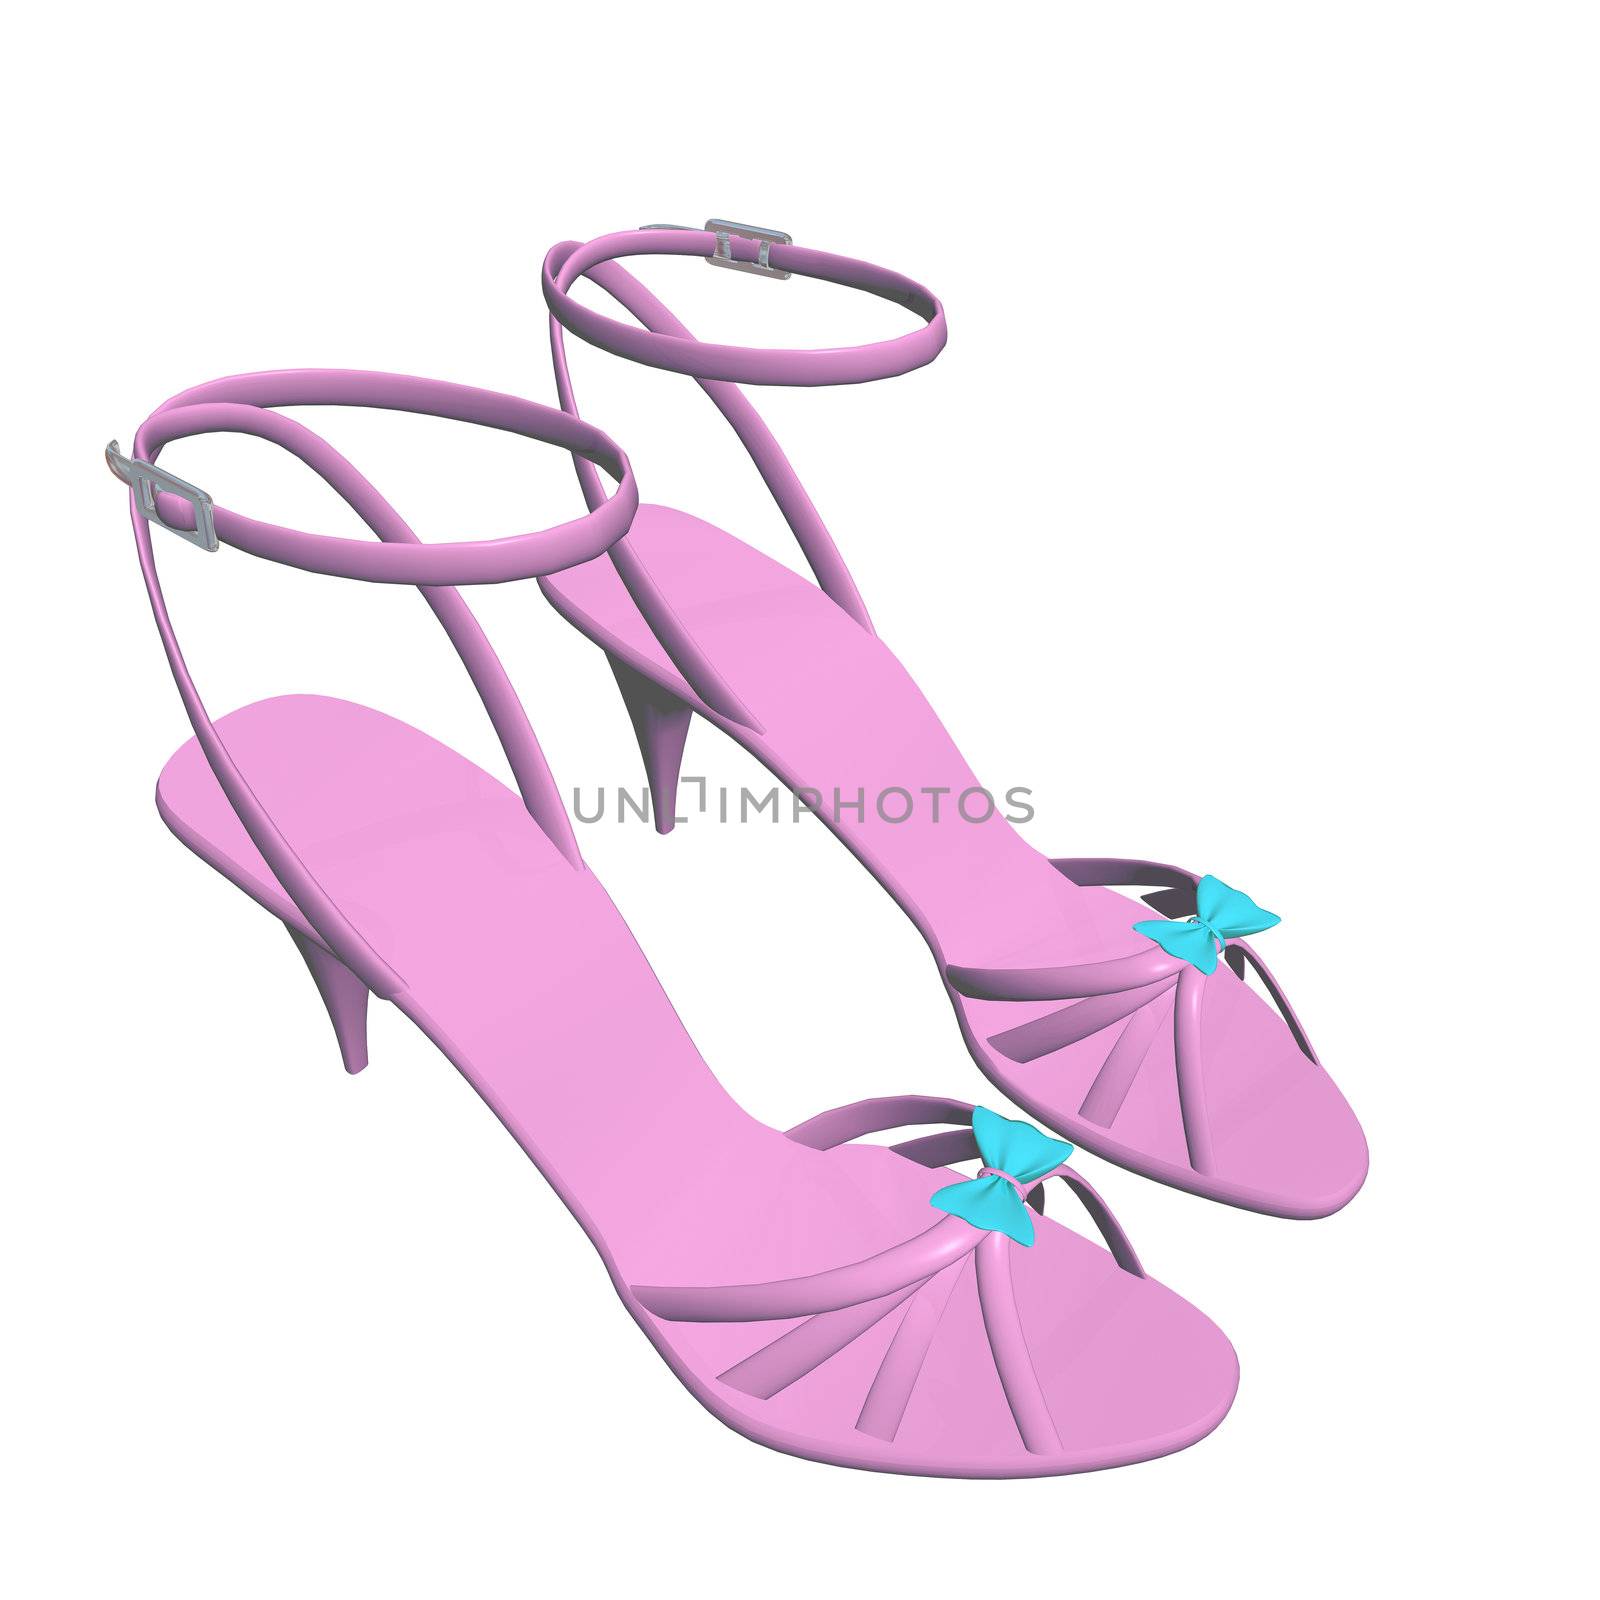 Pink stilleto heels or hig heels shoes with ankle strap and blue ribbon, 3D illustration, isolated against a white background